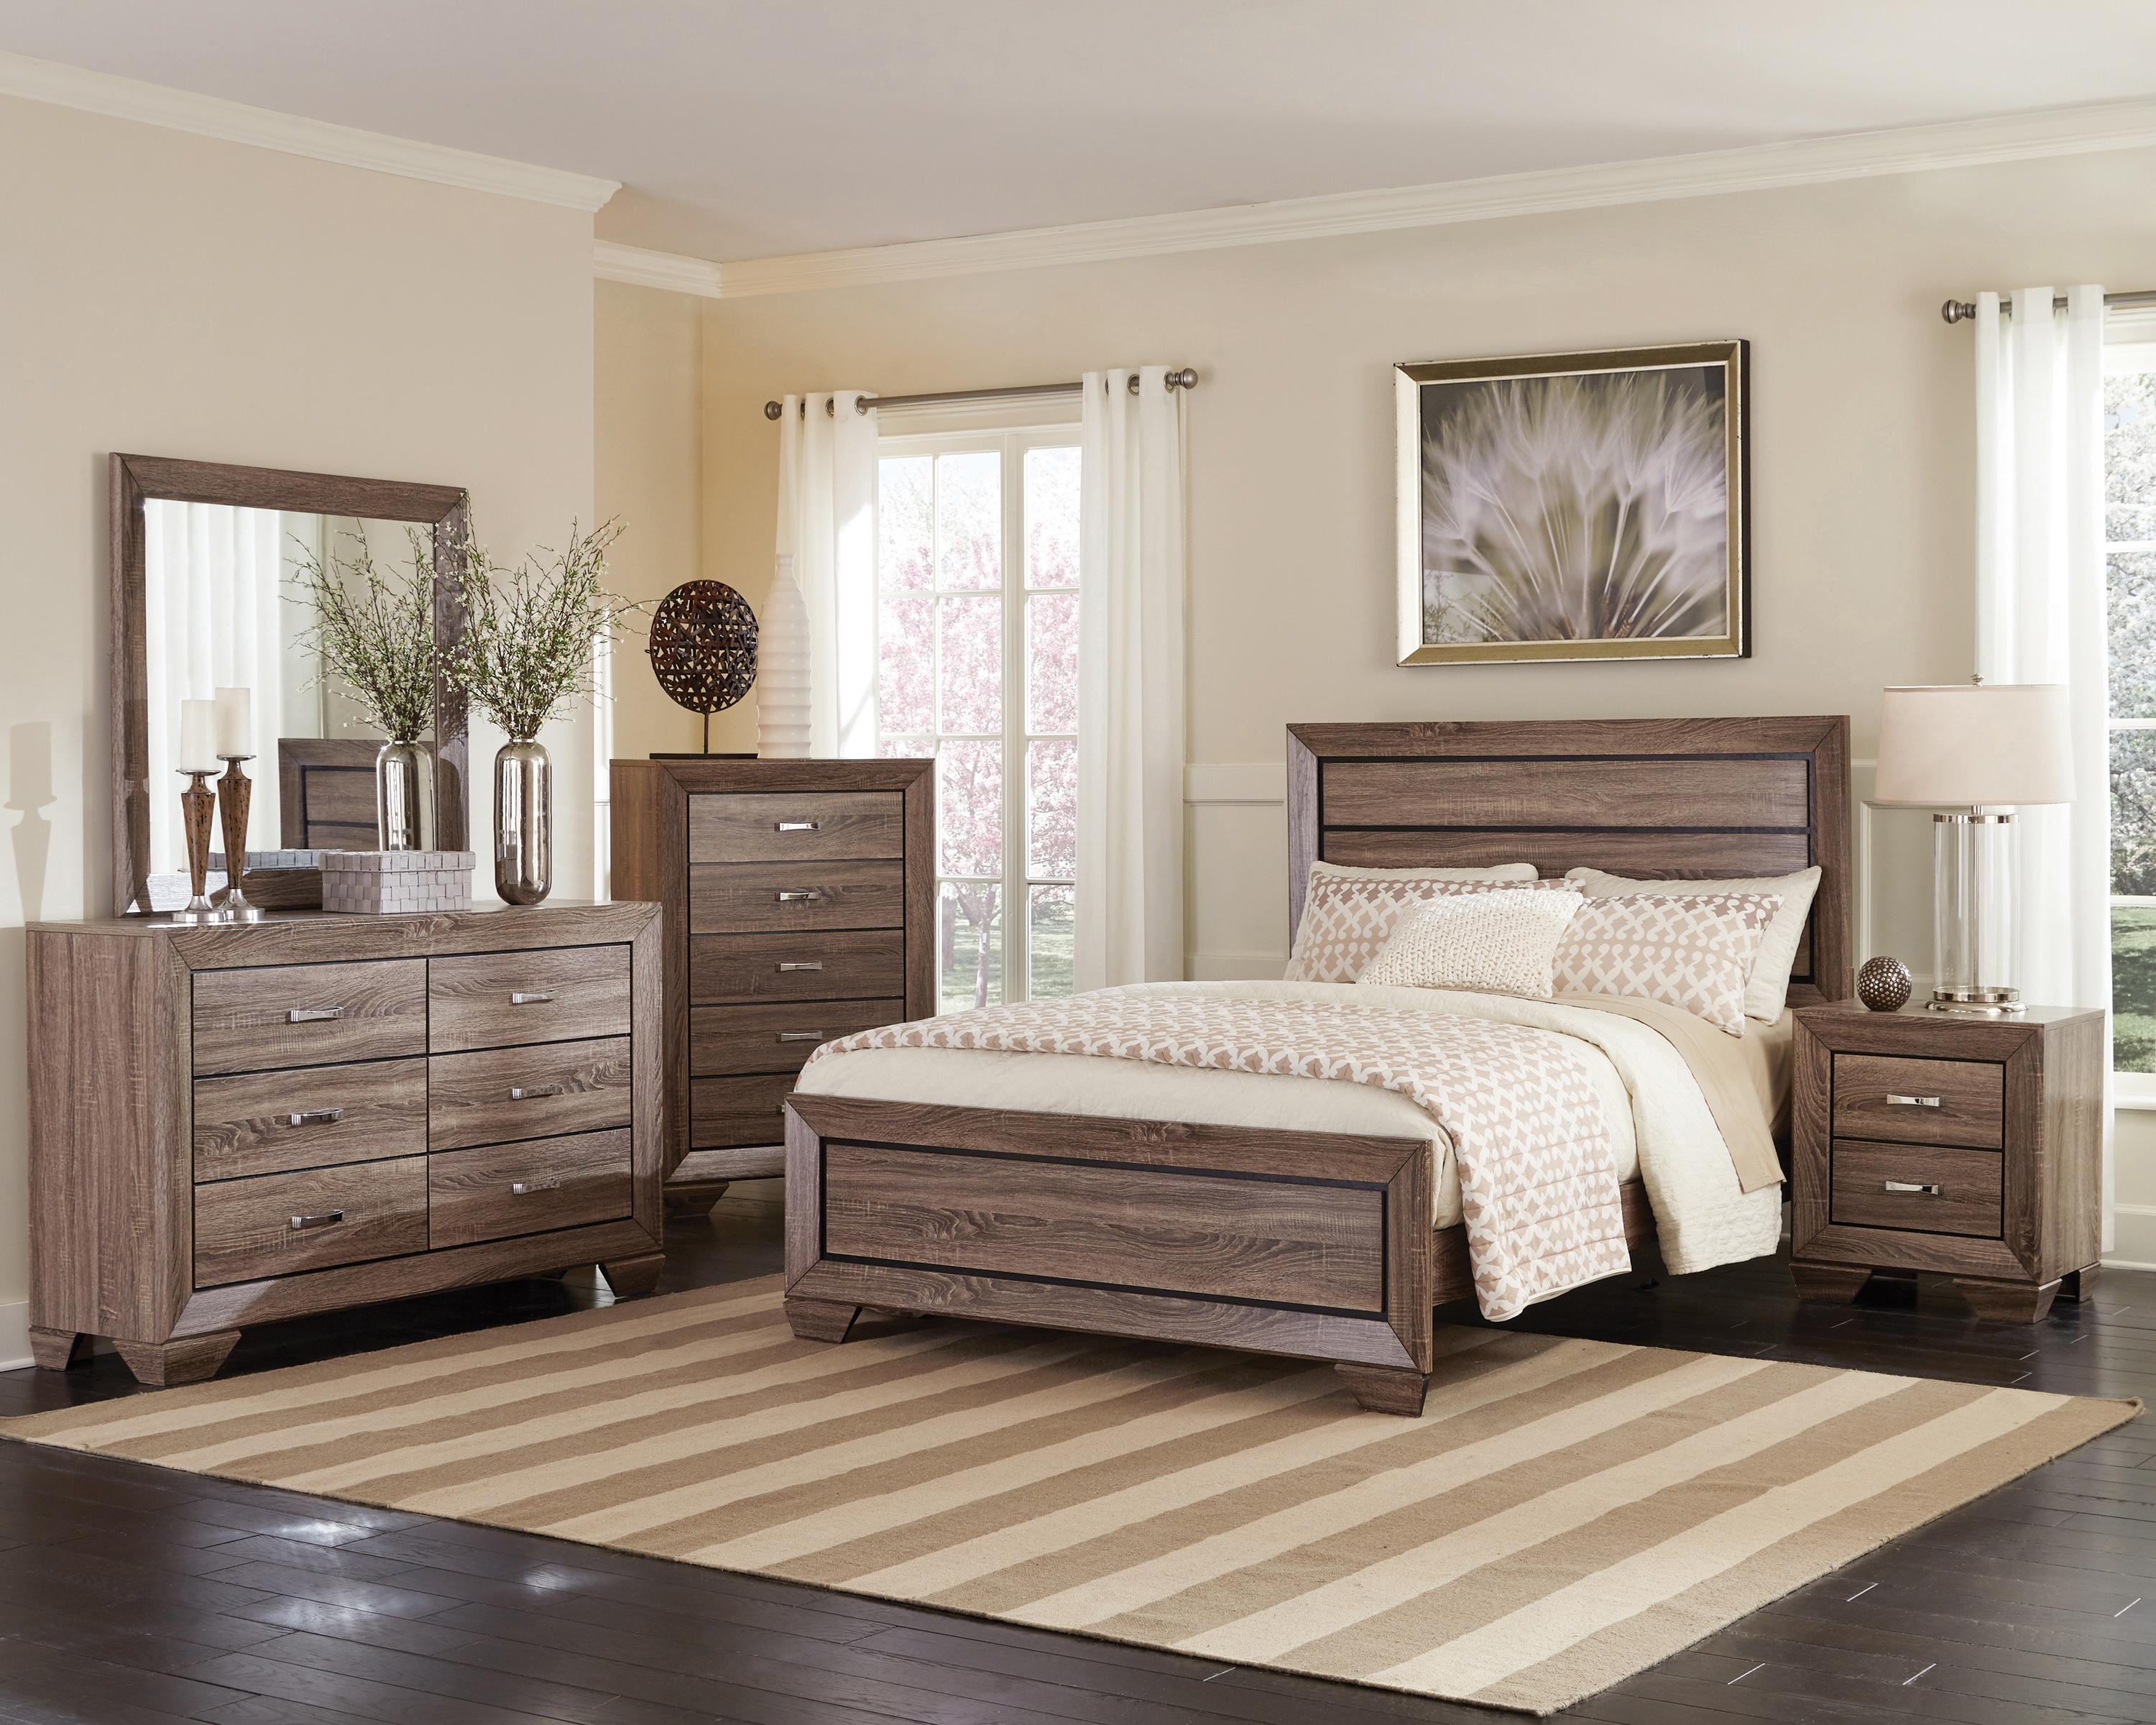 Transitional Bedroom Set 204190KW-6PC Kauffman 204190KW-6PC in Taupe 